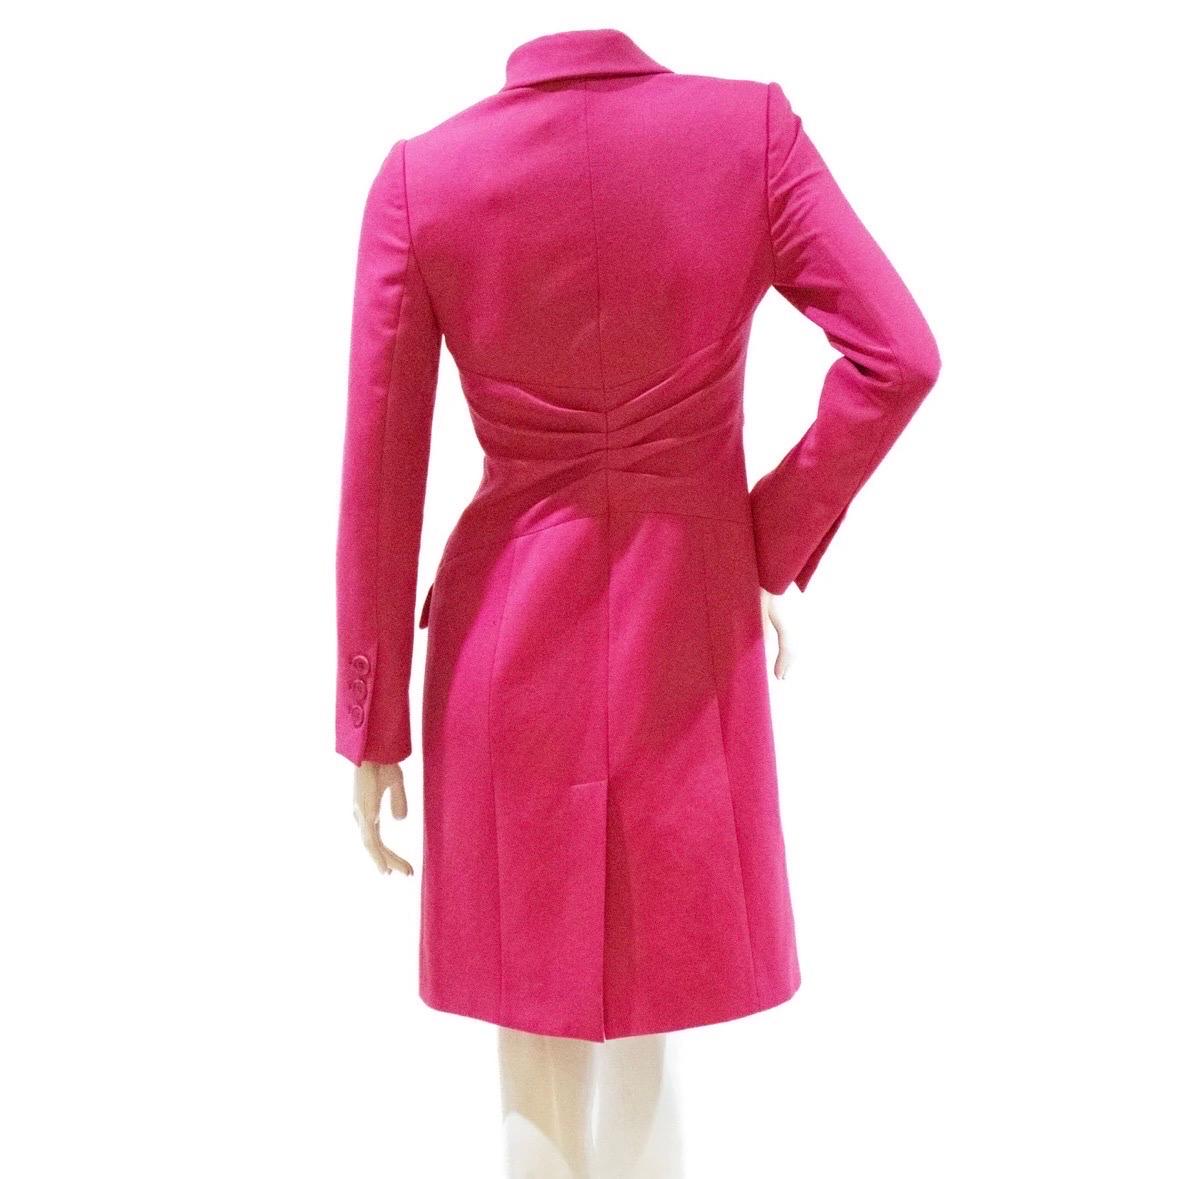 Fuchsia blazer coat by Gianni Versace
2009 collection
Made in Italy
Double-breasted v-neck
Contrasting neckline fabrics (silk and wool)
Fitted waist with knife pleats
Hook and eye front closure 
Split front with reveal
Monochromatic pink cuff